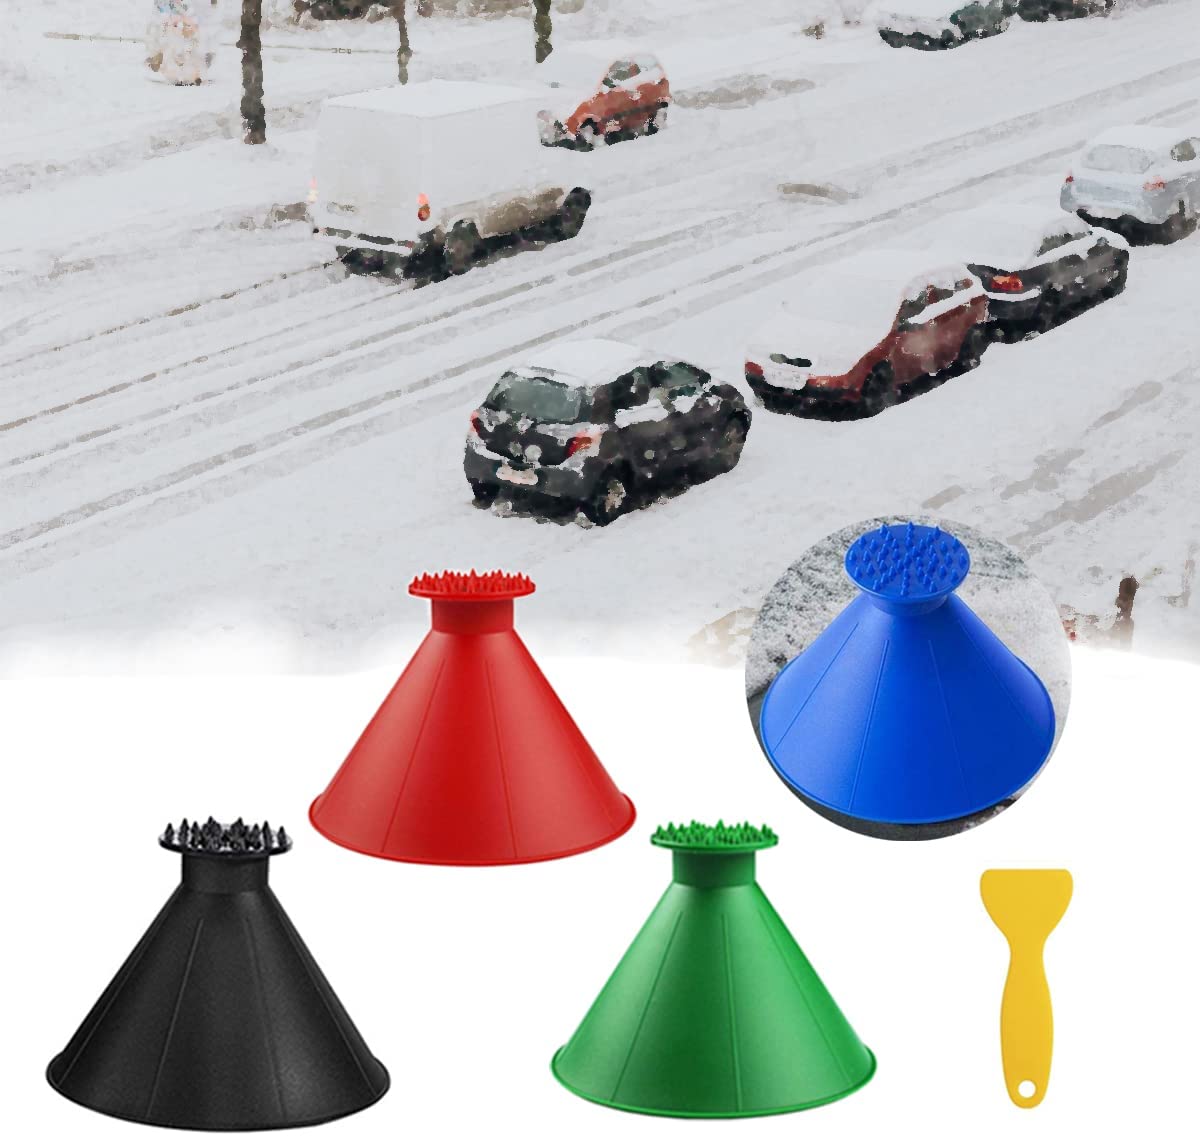 (Gazdag)Ice Scraper and Snow Brush for Car Windshield for Car Truck SUV